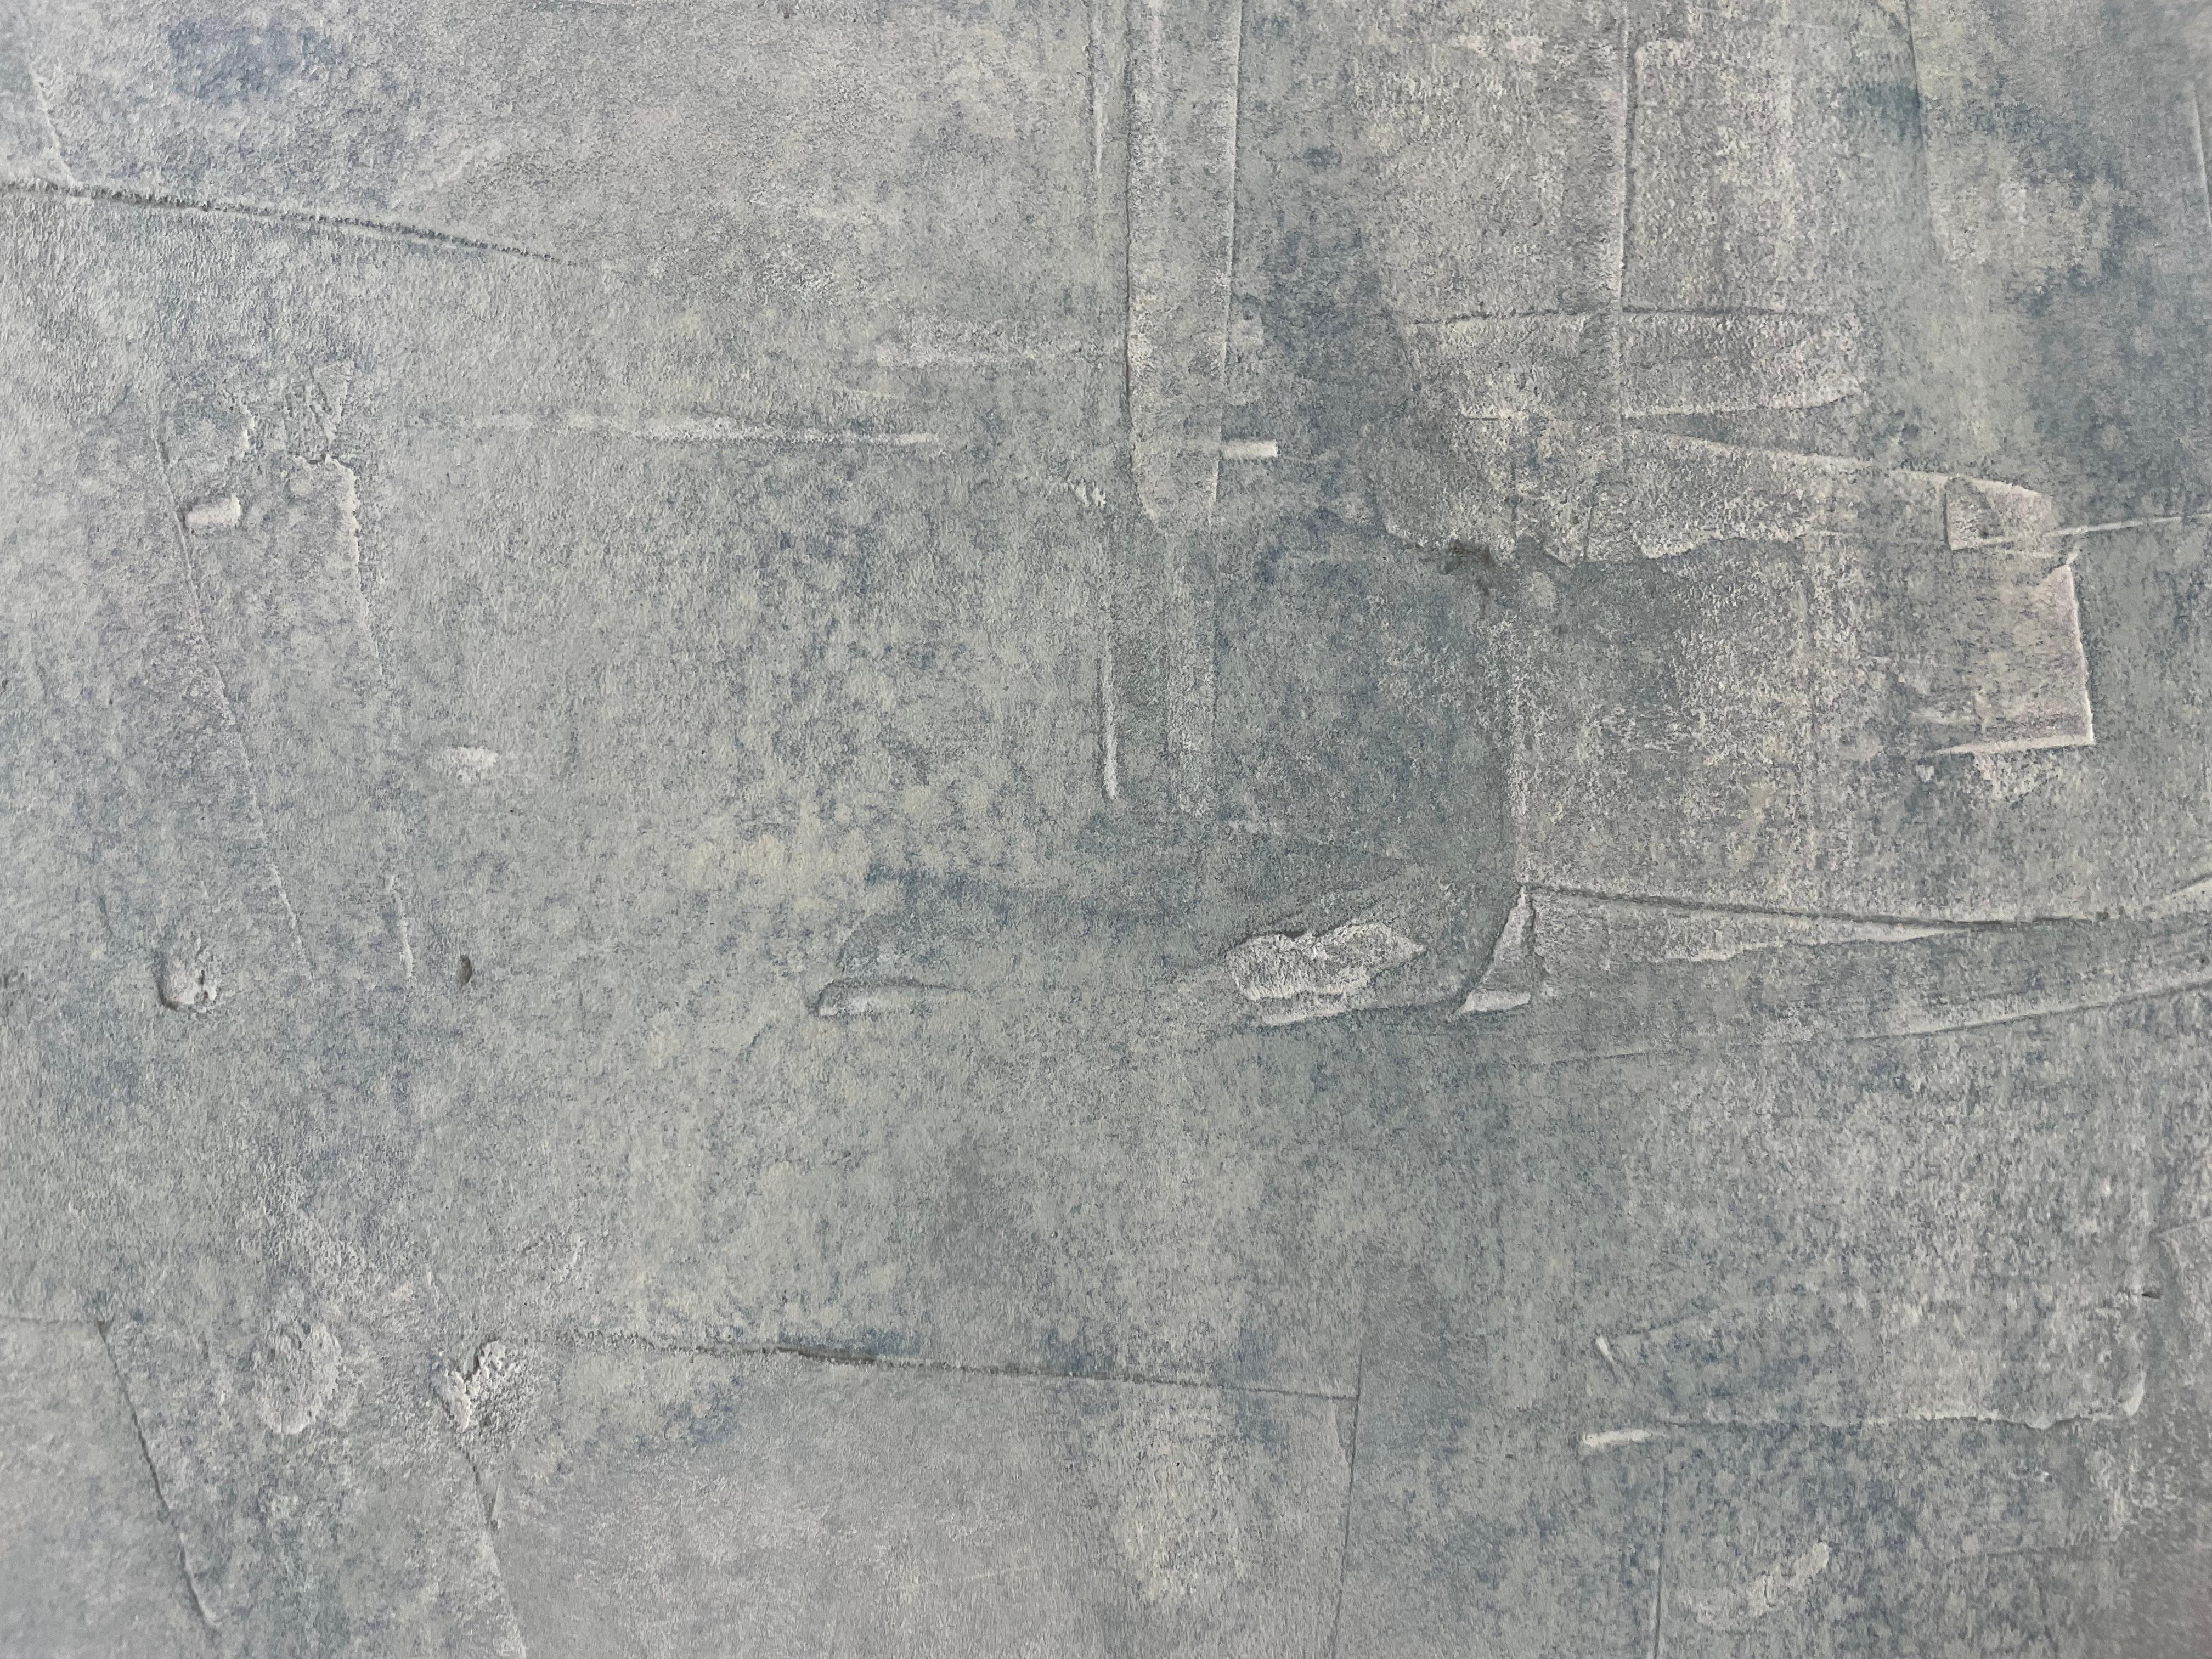 Balanceig - 21st Century, Abstract Art, Cement on Wood, Earth Tones - Gray Abstract Painting by Núria Guinovart